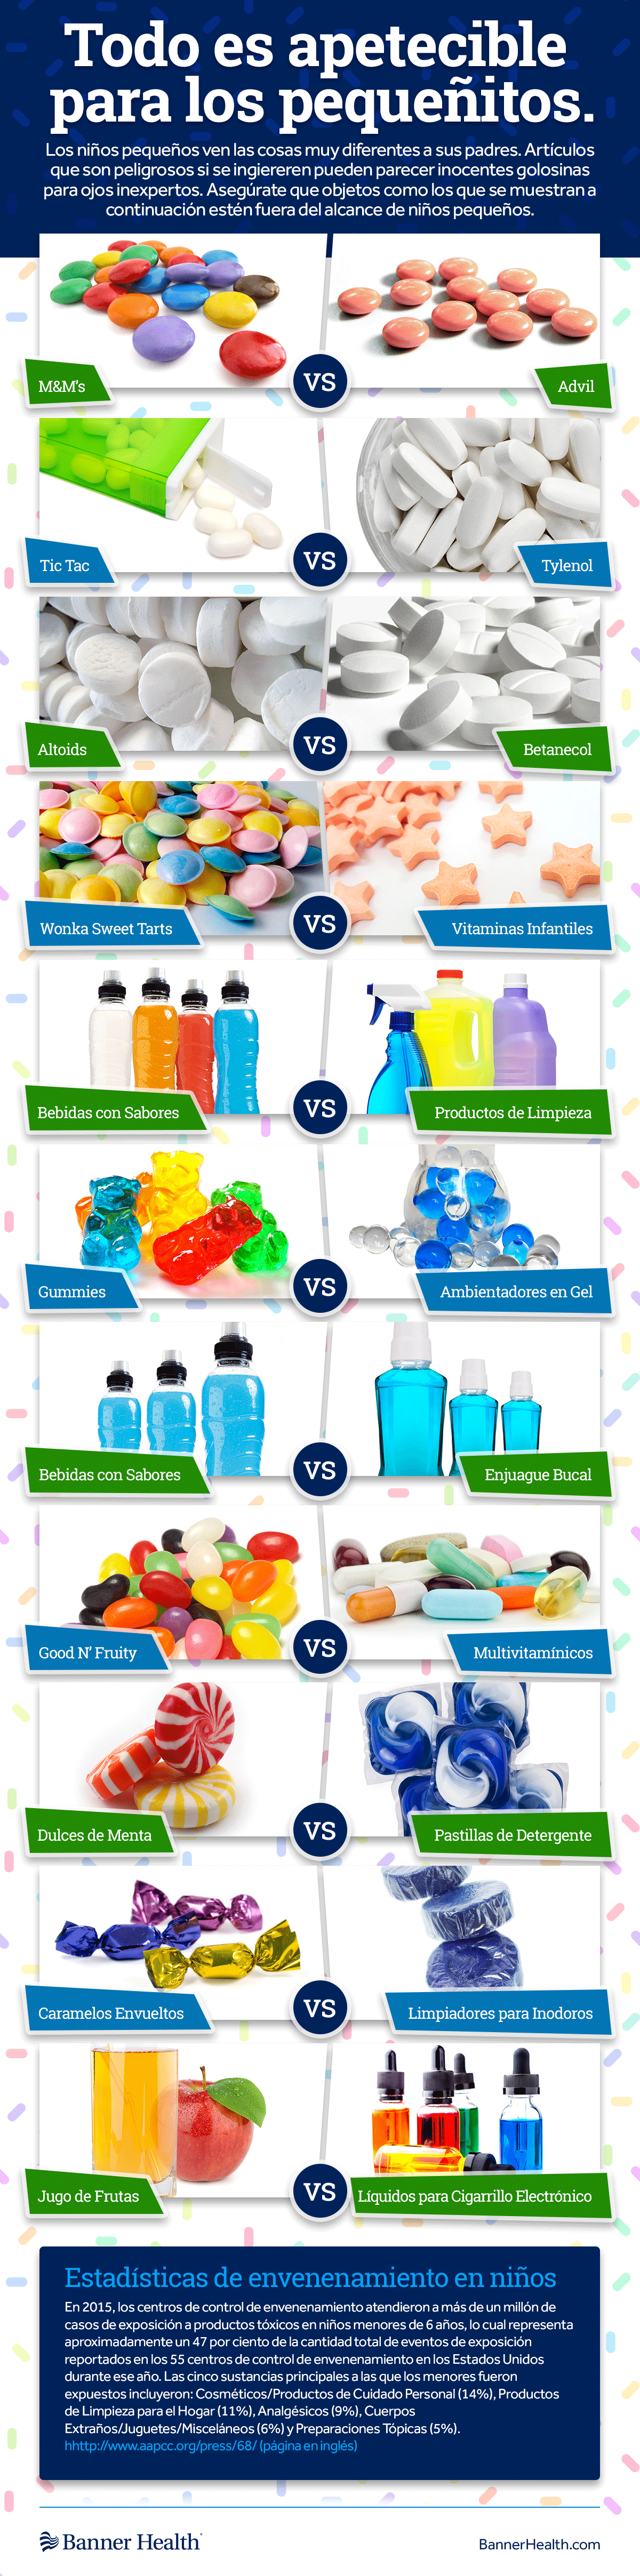 Candy-and-Household-Products-Comparison-Infographic-Spanish